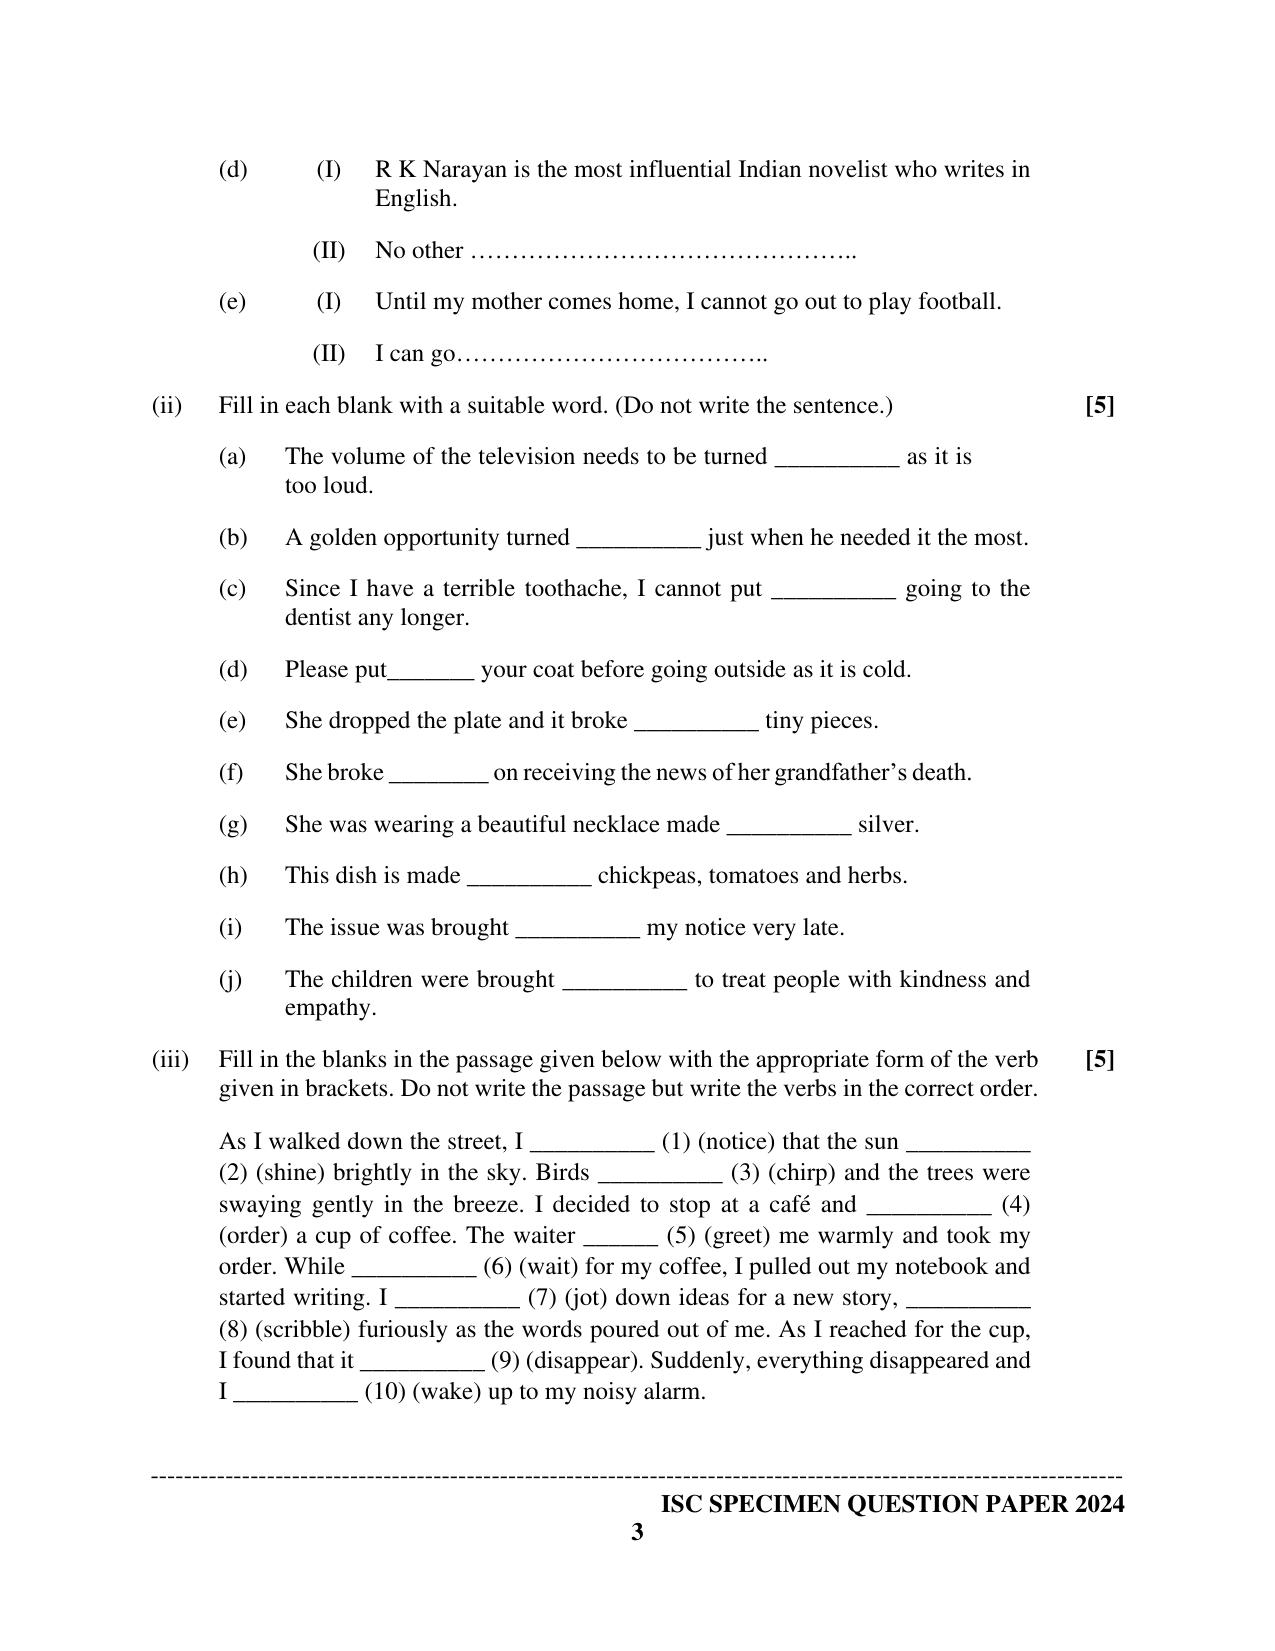 ISC Class 12 2024 English Paper 1 (Language) Sample Paper - Page 3